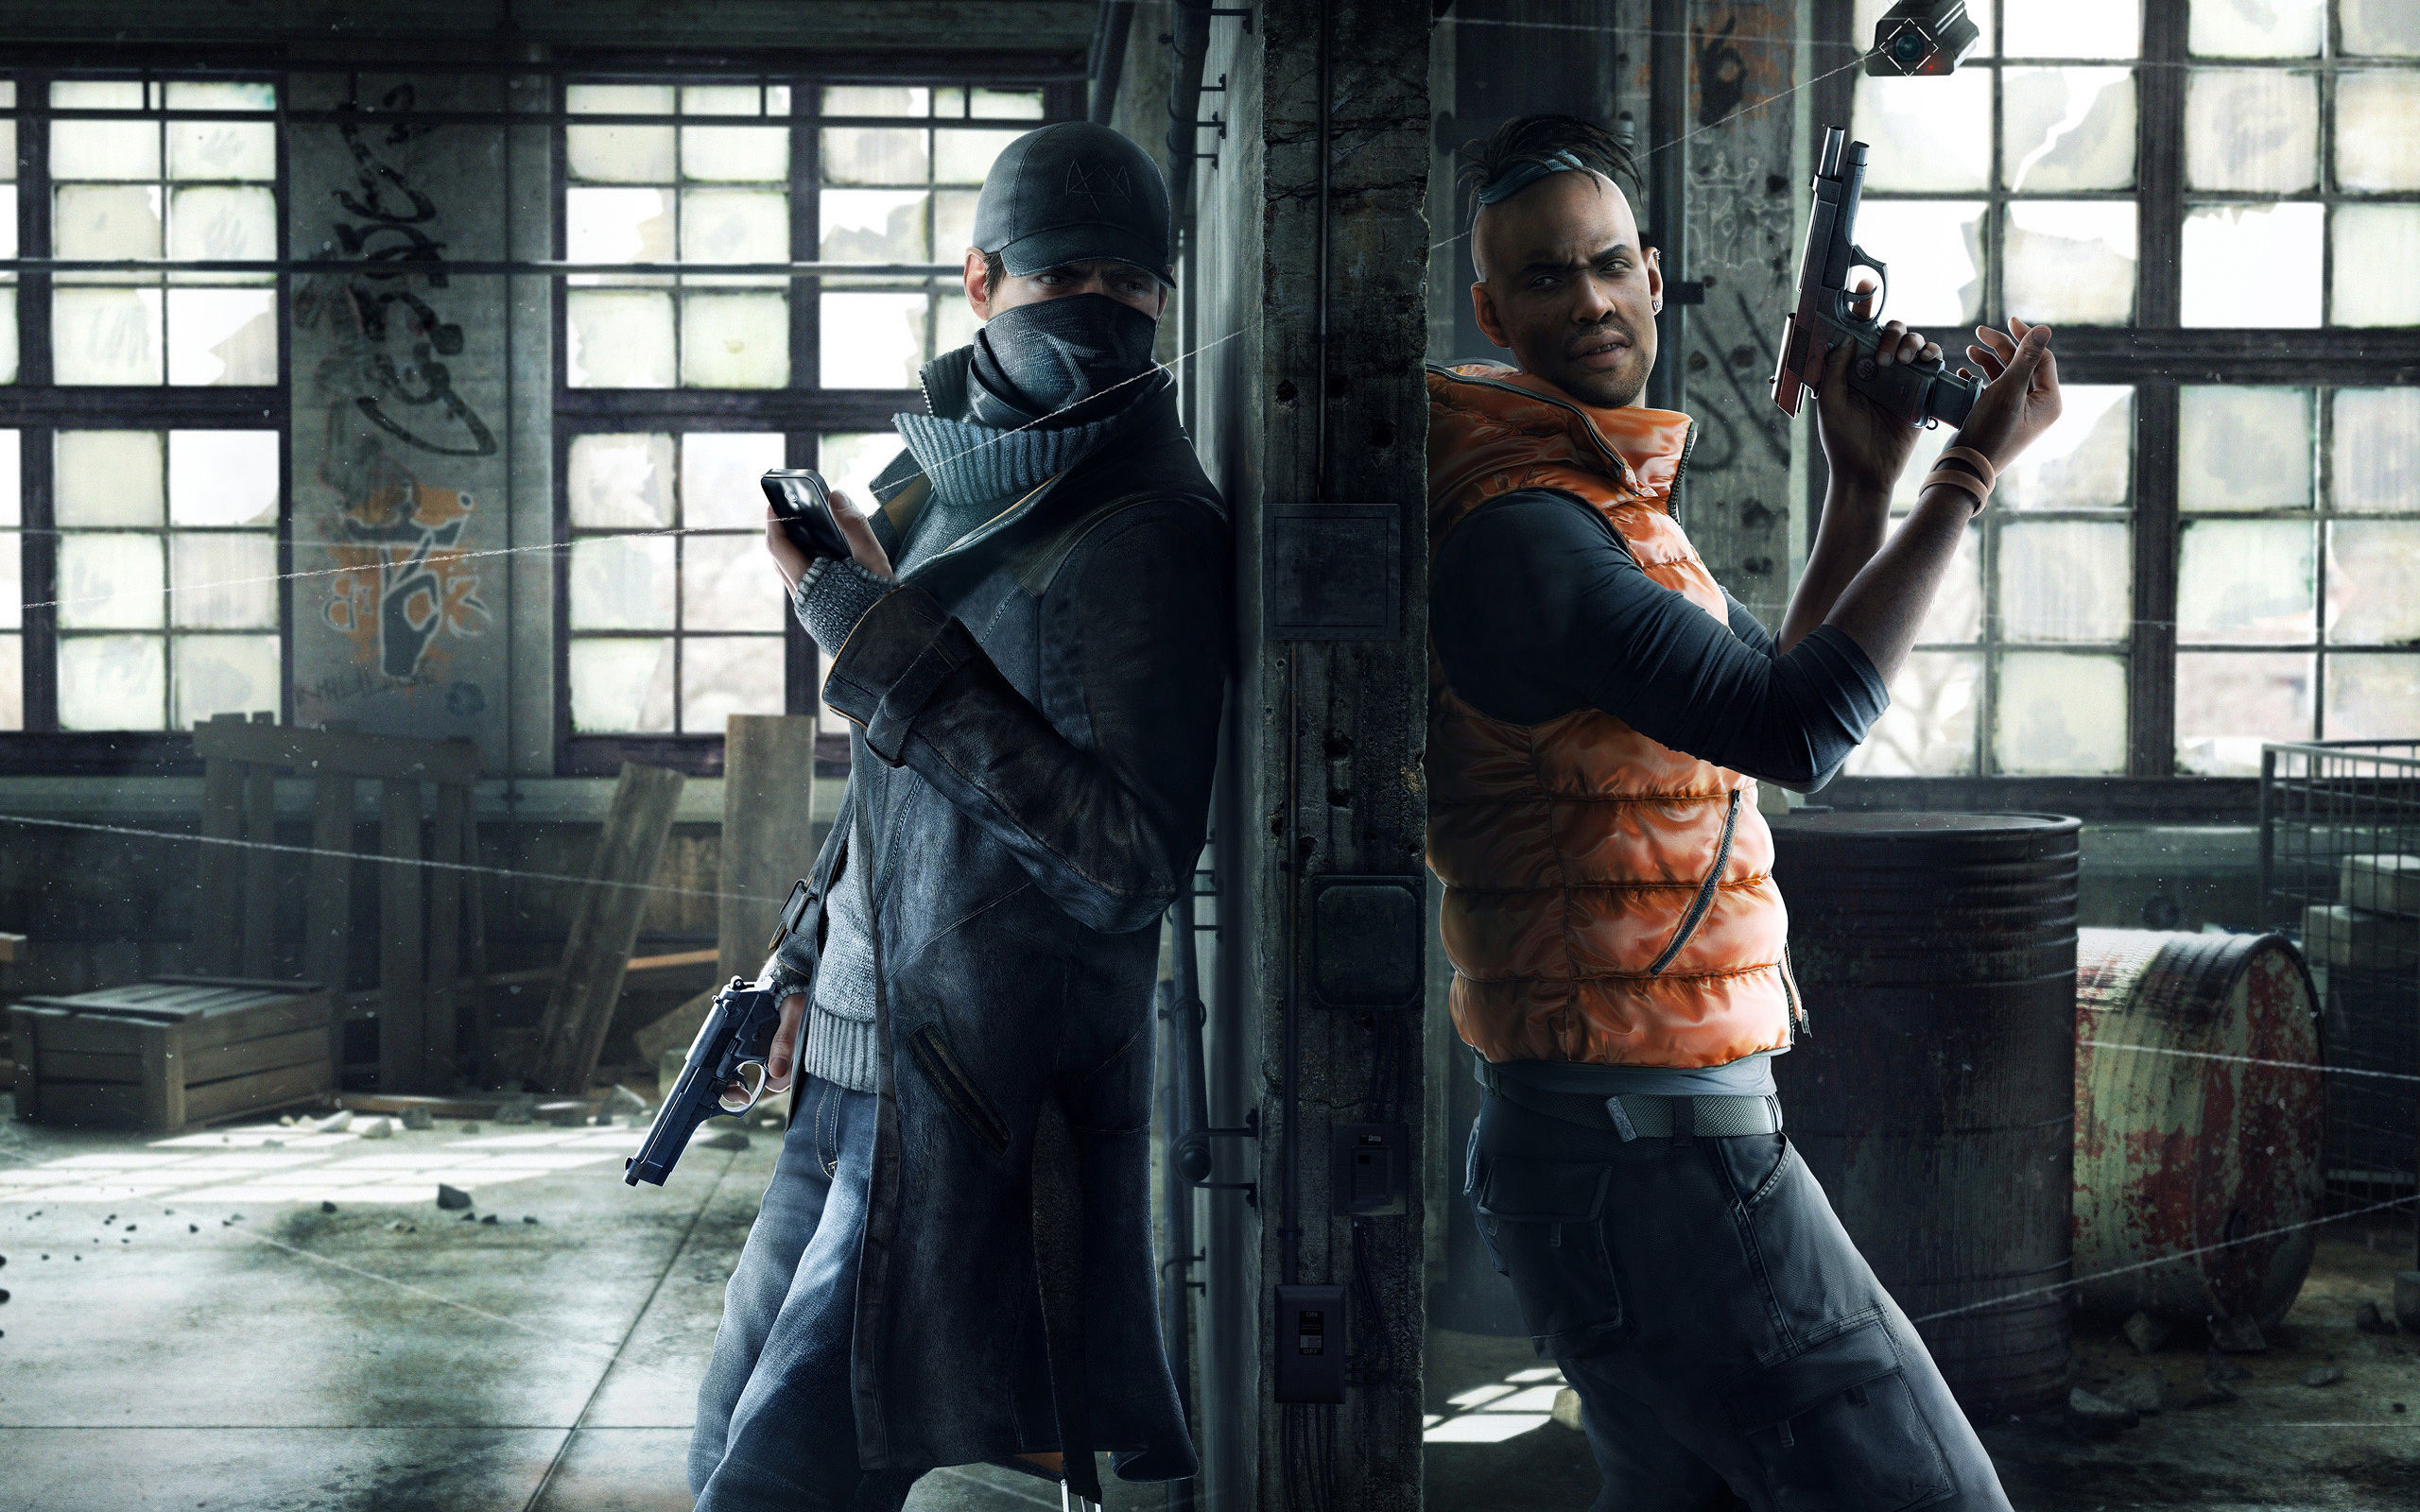 could-watch-dogs-2-take-this-from-assassin-s-creed-watch-dogs-2-323785